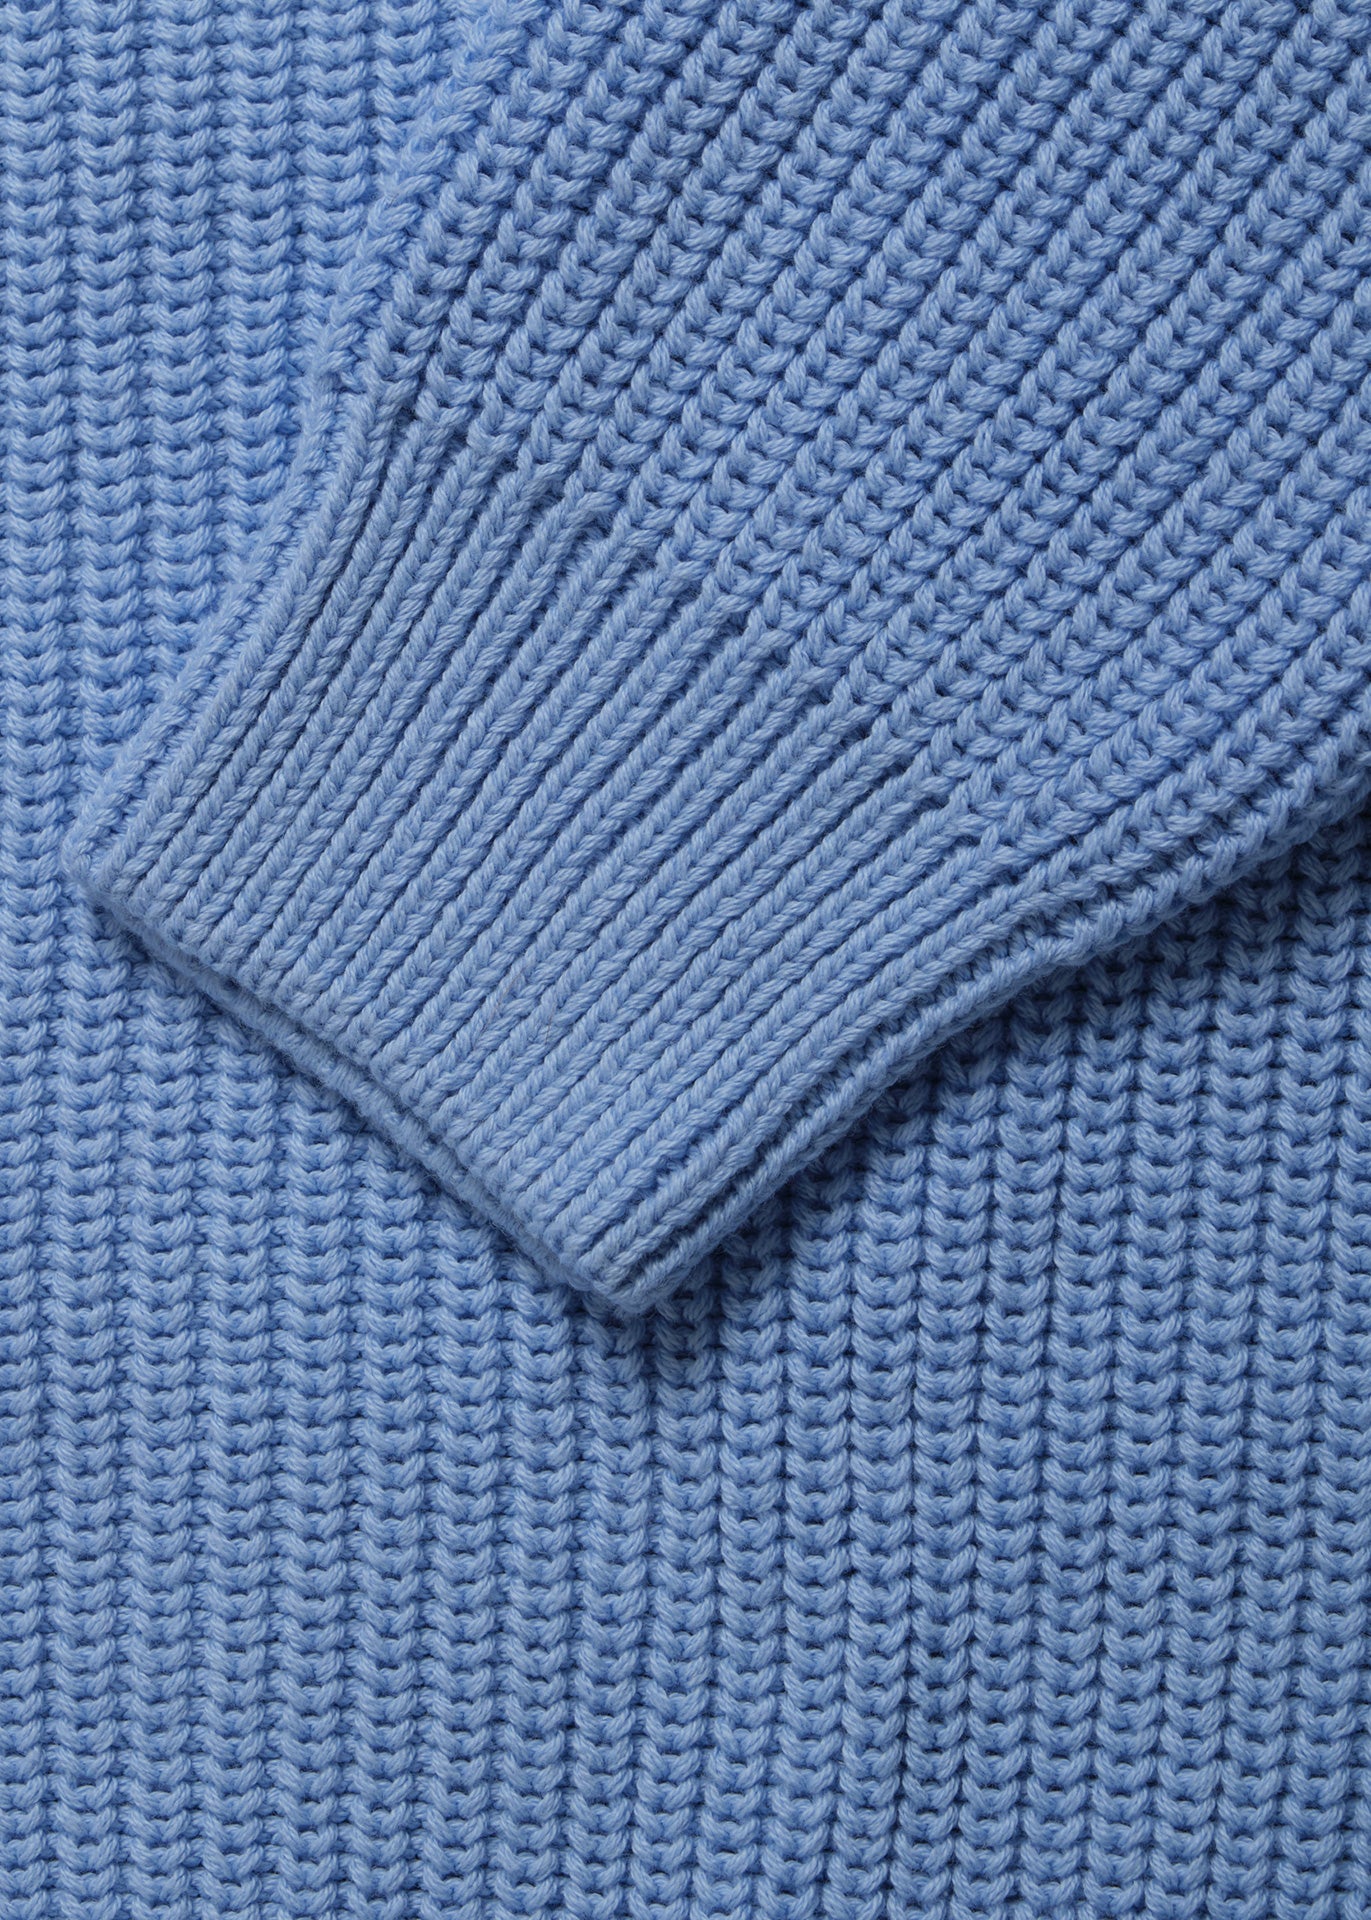 The Blue knit